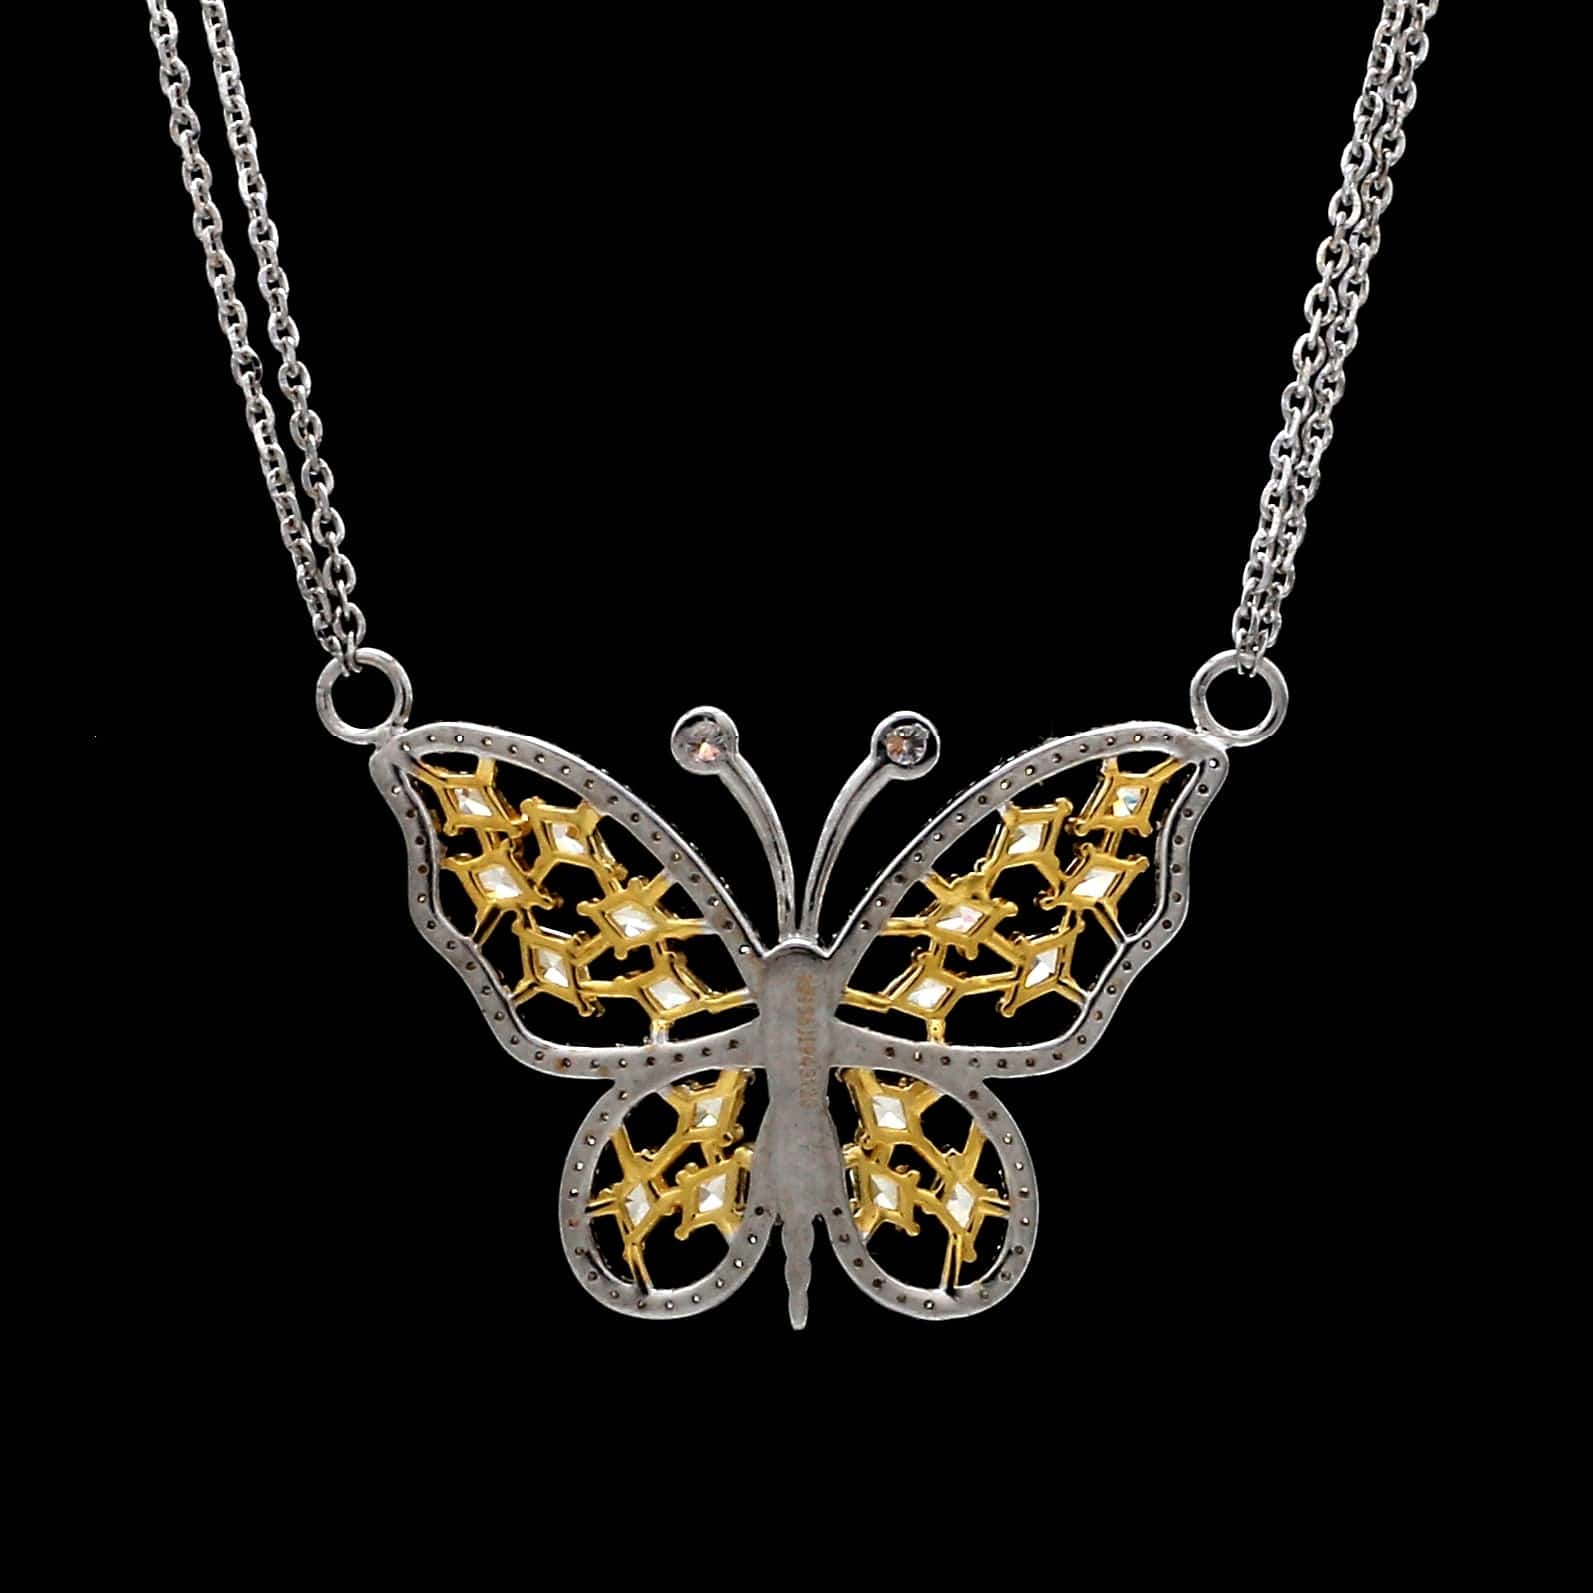 Butterfly Necklace - Buy Butterfly Necklace online in India